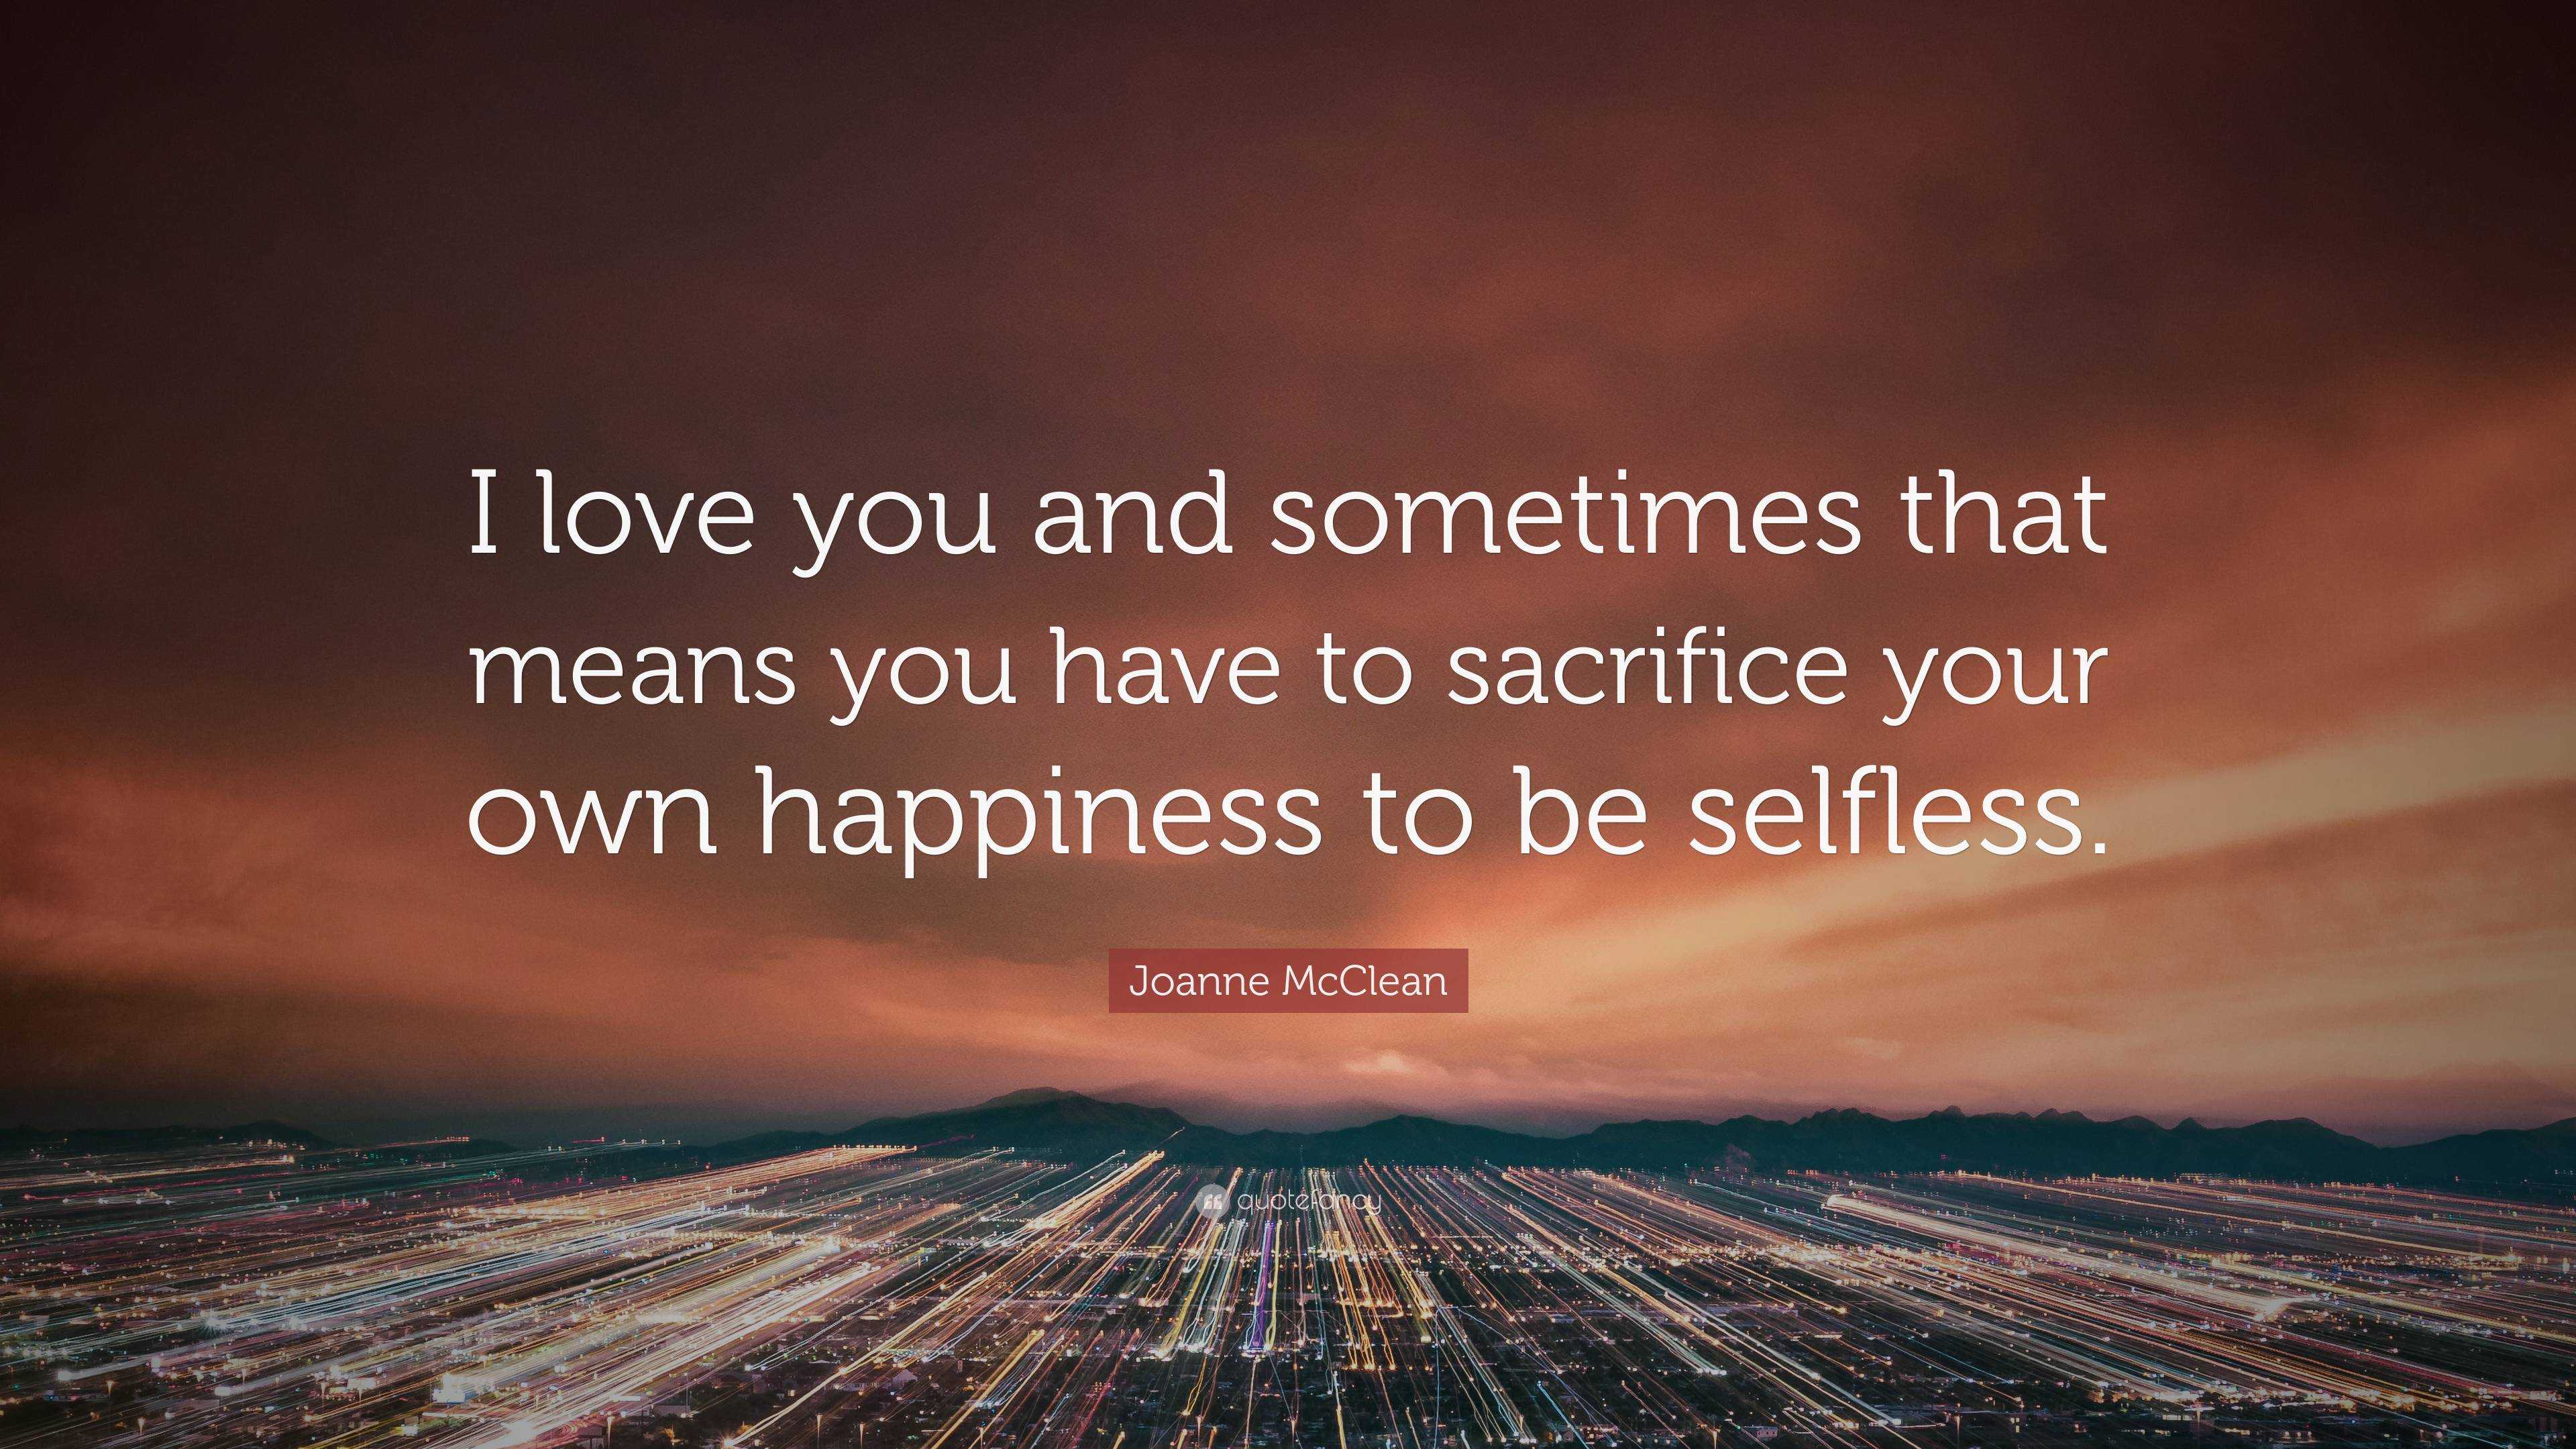 Sometimes you need to sacrifice your own happiness and choose to